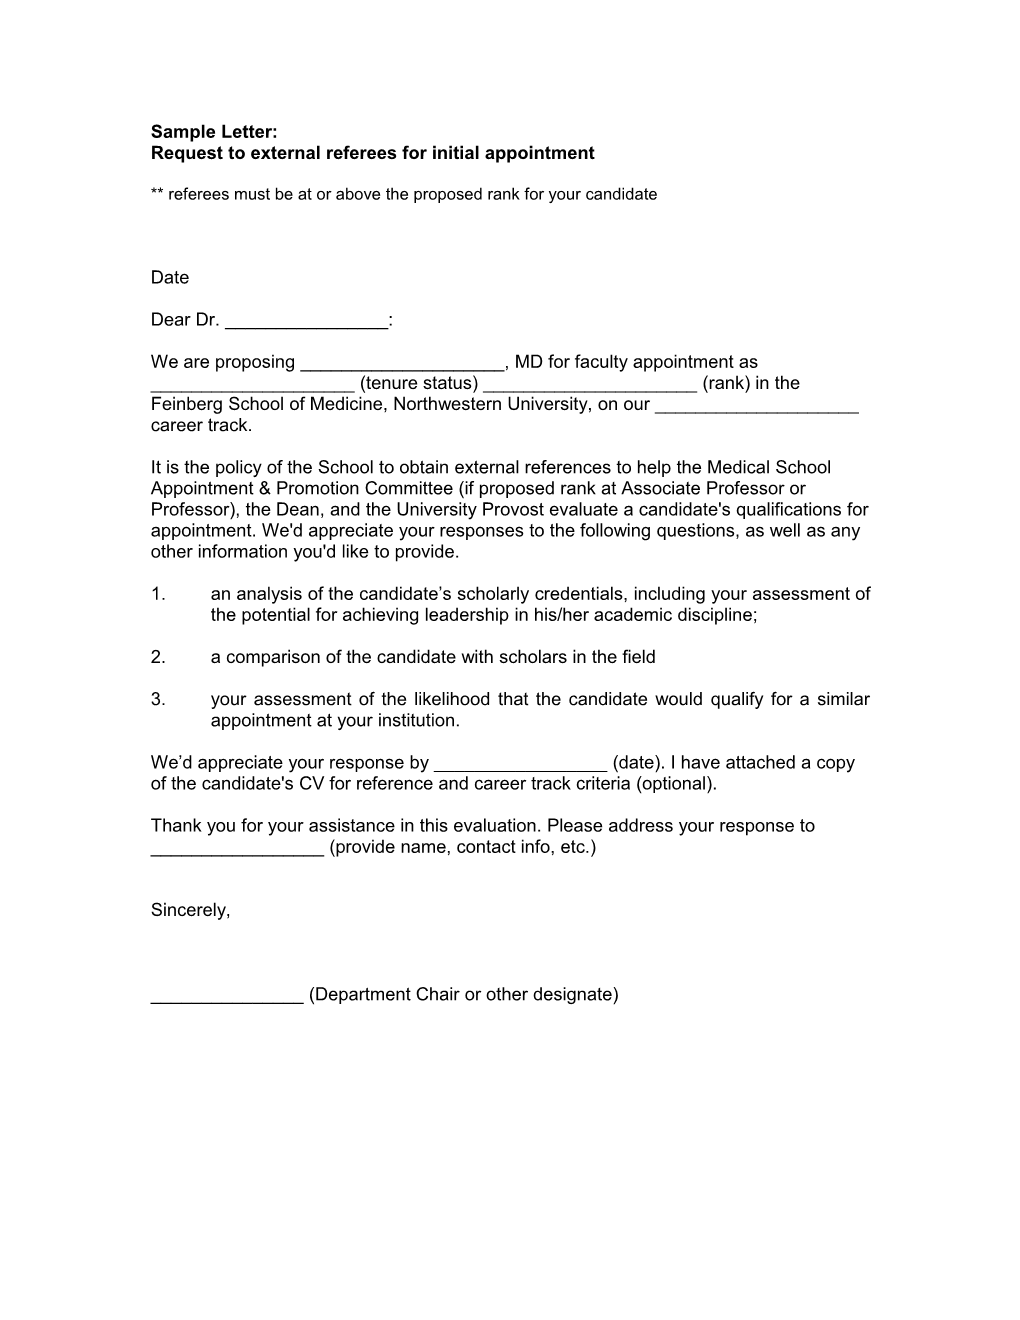 Sample Letter: Request to External Referees for Initial Appointment